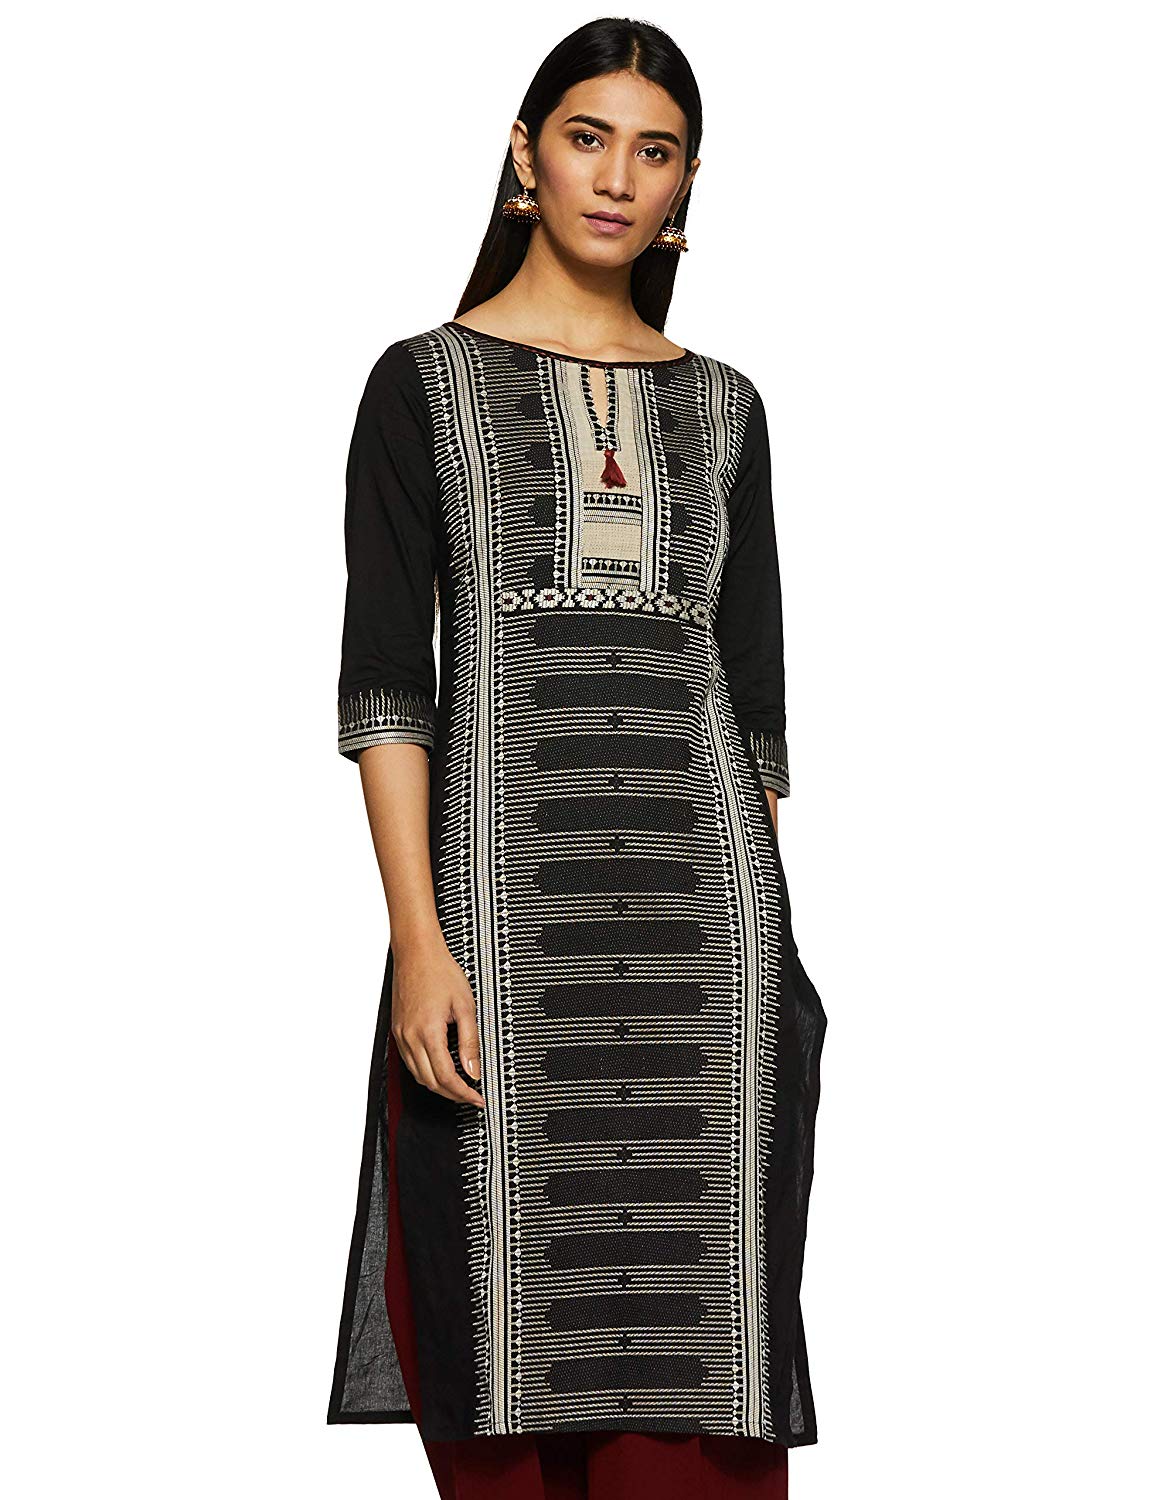 Buy Morpich Muslin Embroidered Casual Kurti at best price : 84254 - New  Arrivals